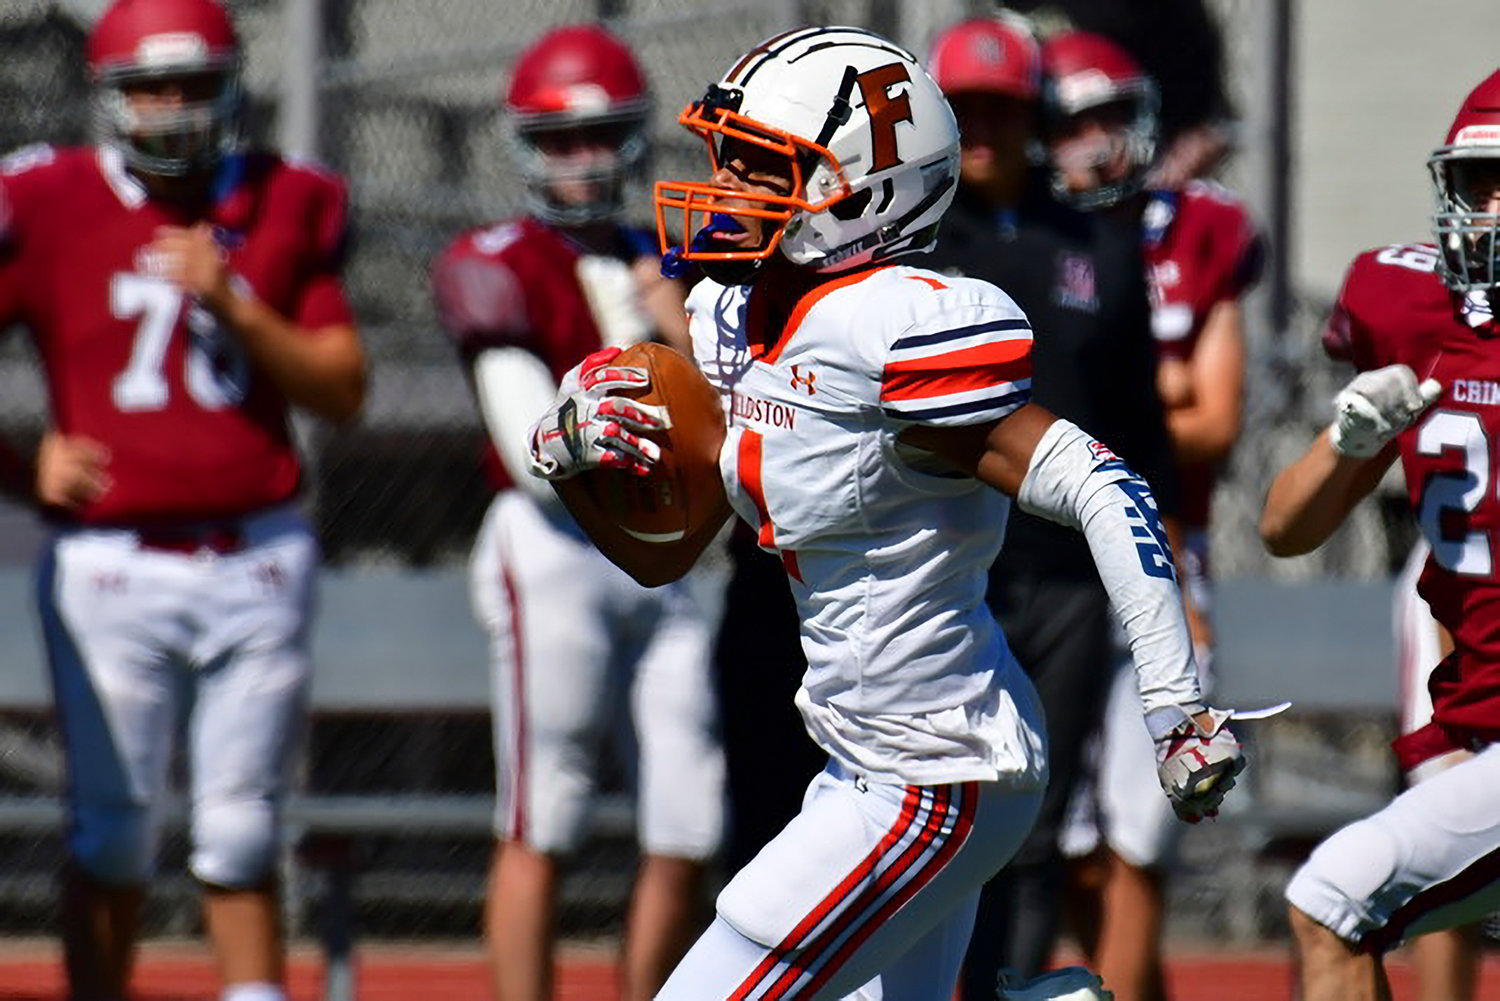 Fieldston’s Jaden Mena racking up some of his 136 all-purpose yards against Morristown-Beard Saturday in a 23-18 loss. He finished with a touchdown.